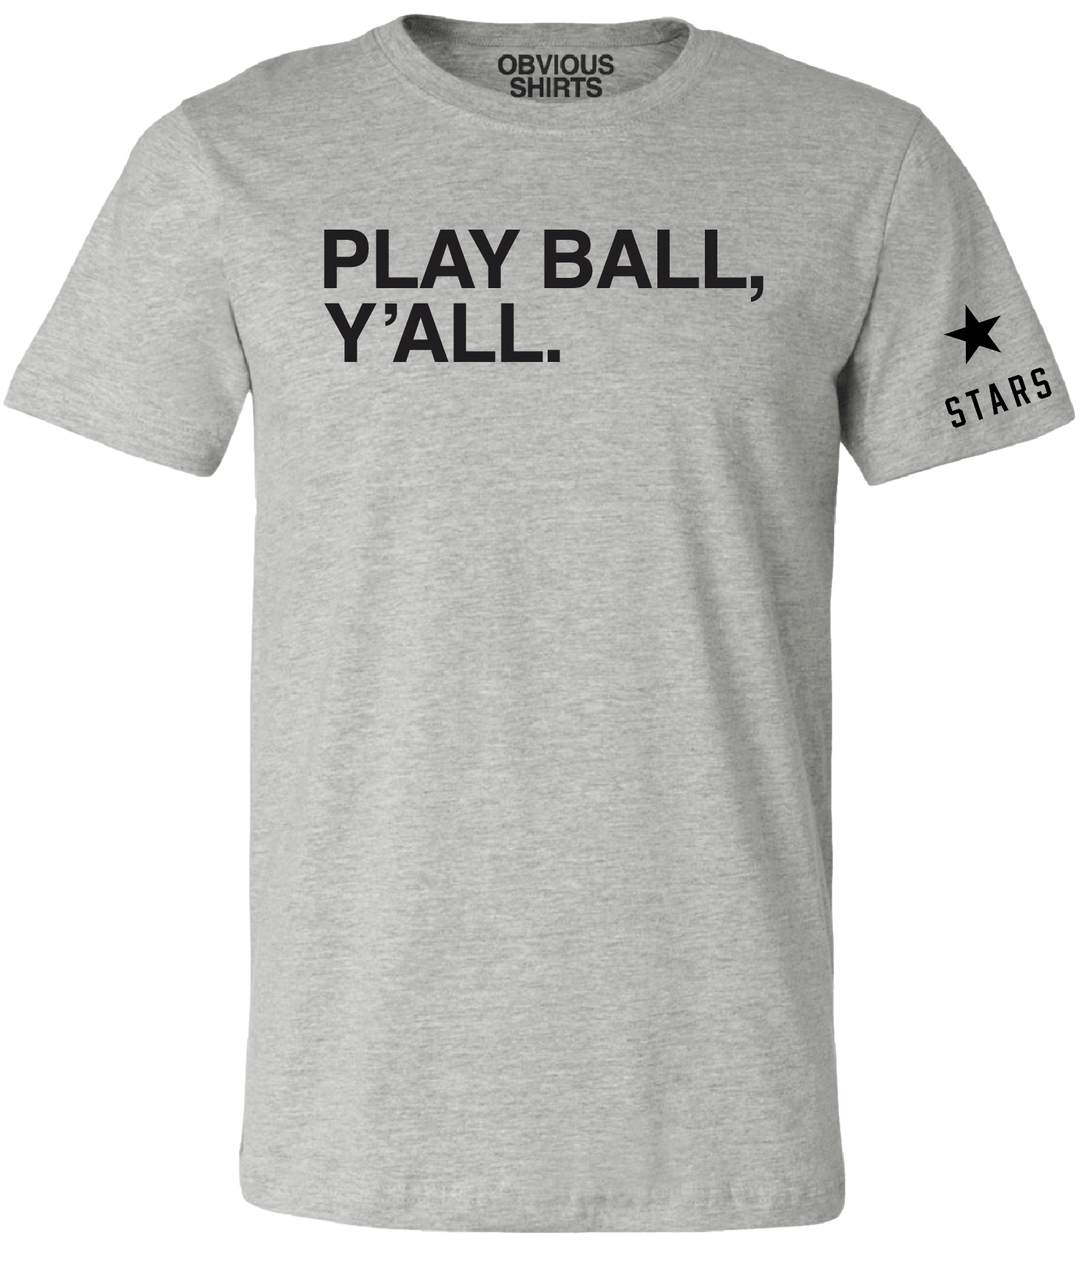 PLAY BALL, Y'ALL. (GREY) - OBVIOUS SHIRTS